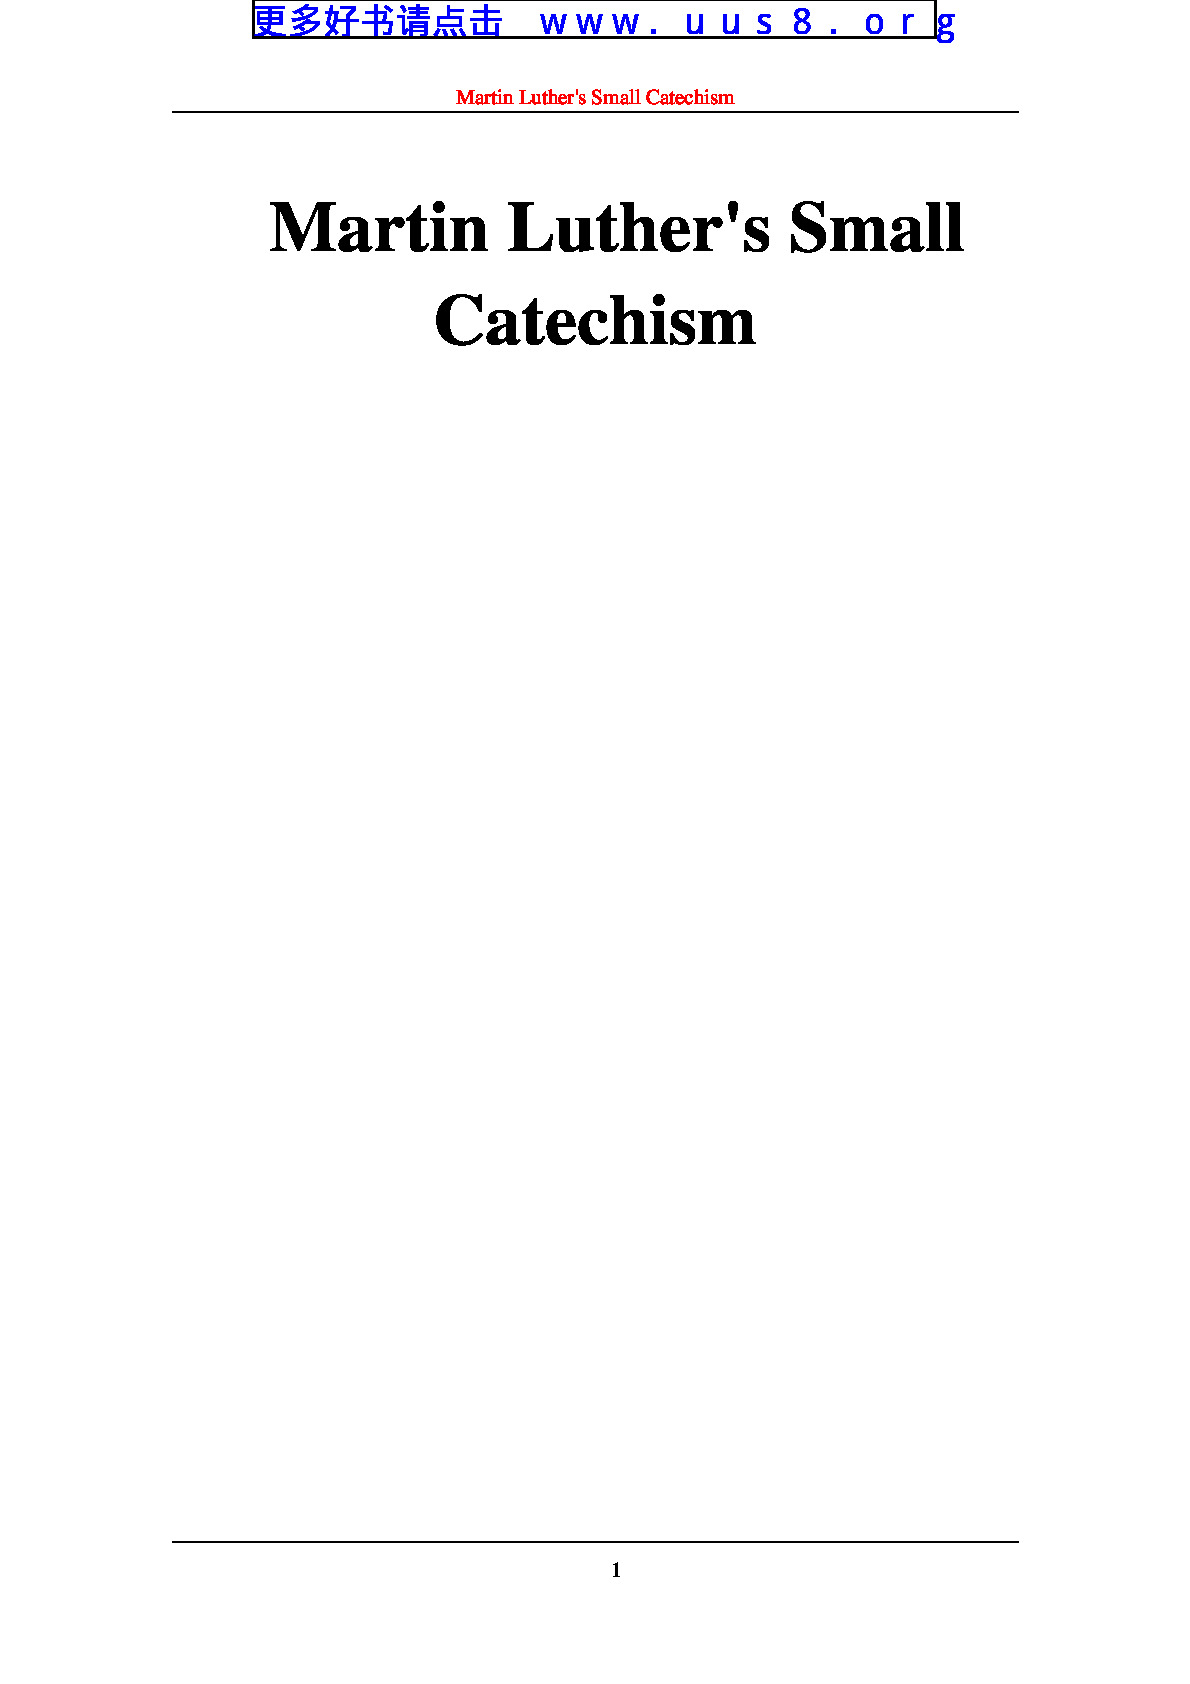 Martin_Luther’s_Small_Catechism(马丁路德的小本《教理问答》)